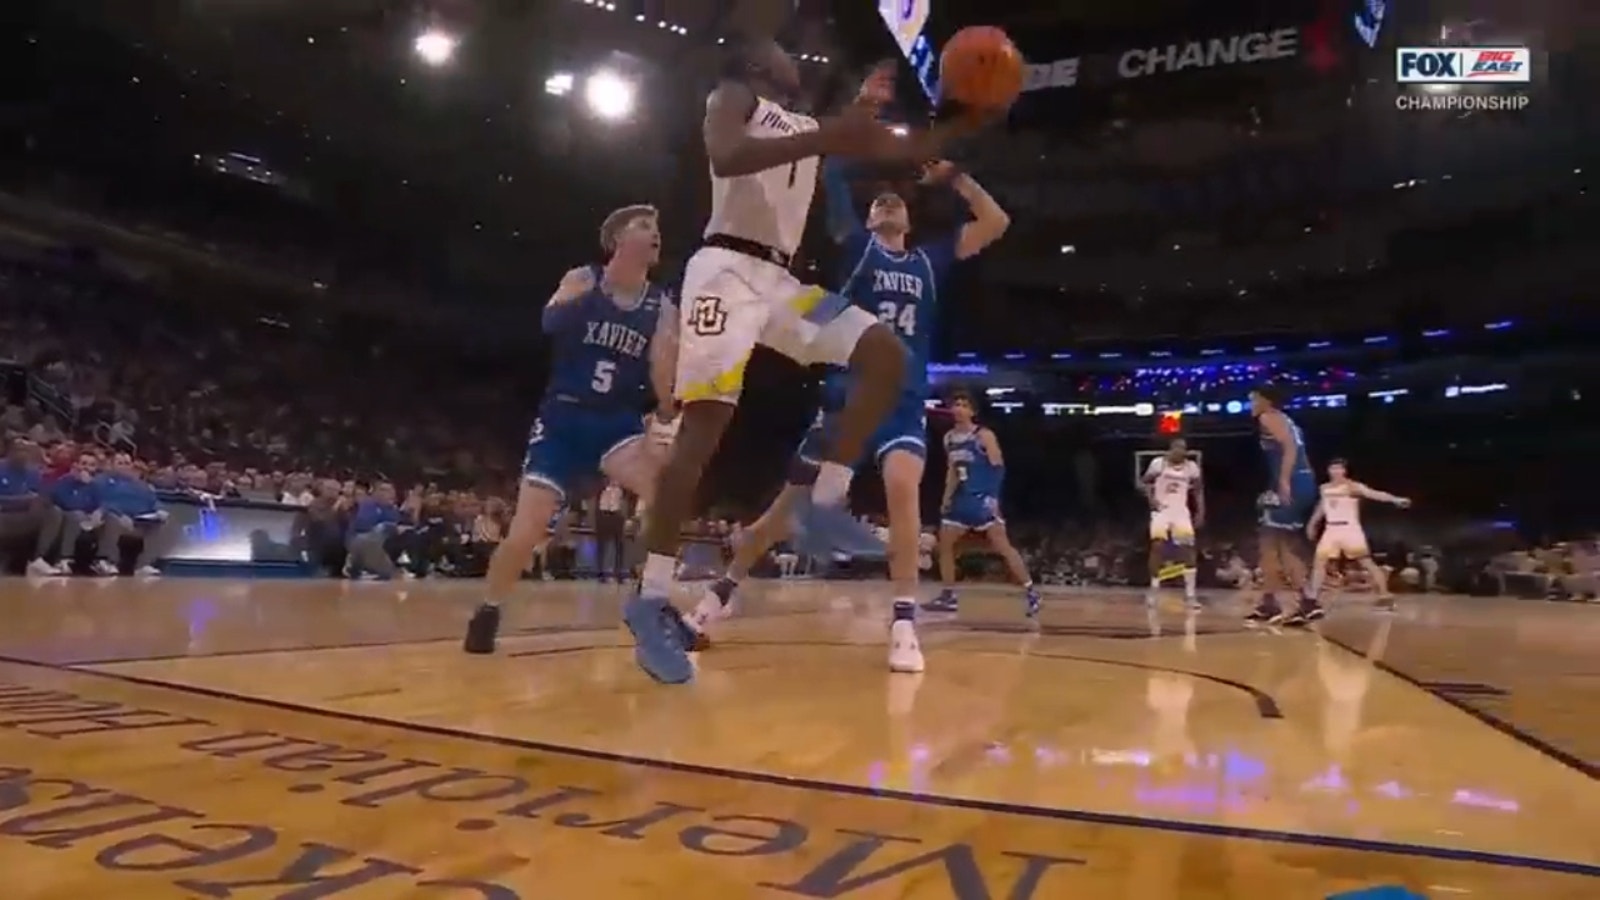 Kam Jones throws down a wicked reverse layup to extend Marquette's lead